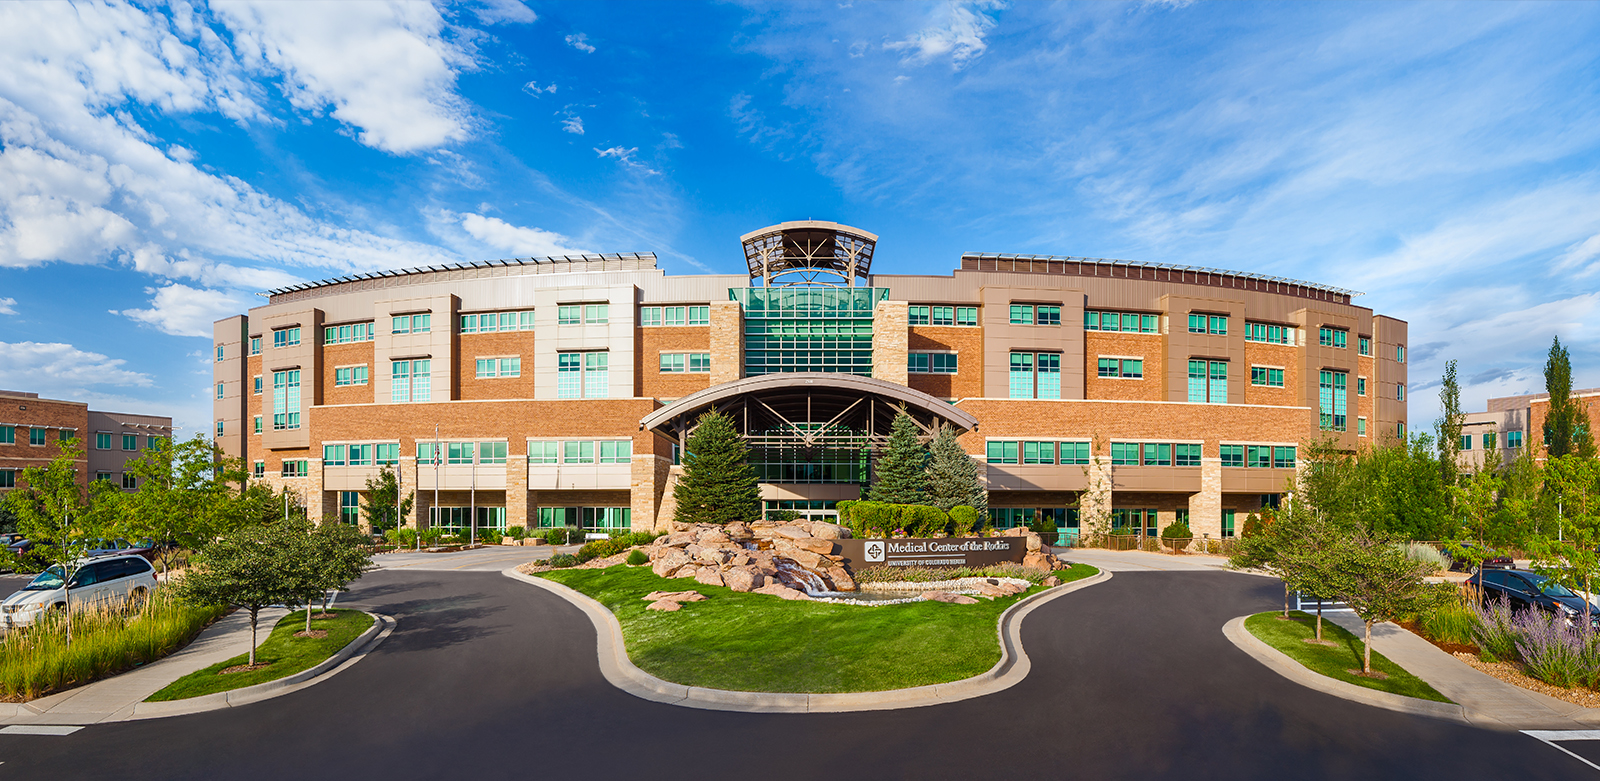 University of Colorado Health, Medical Center of the Rockies